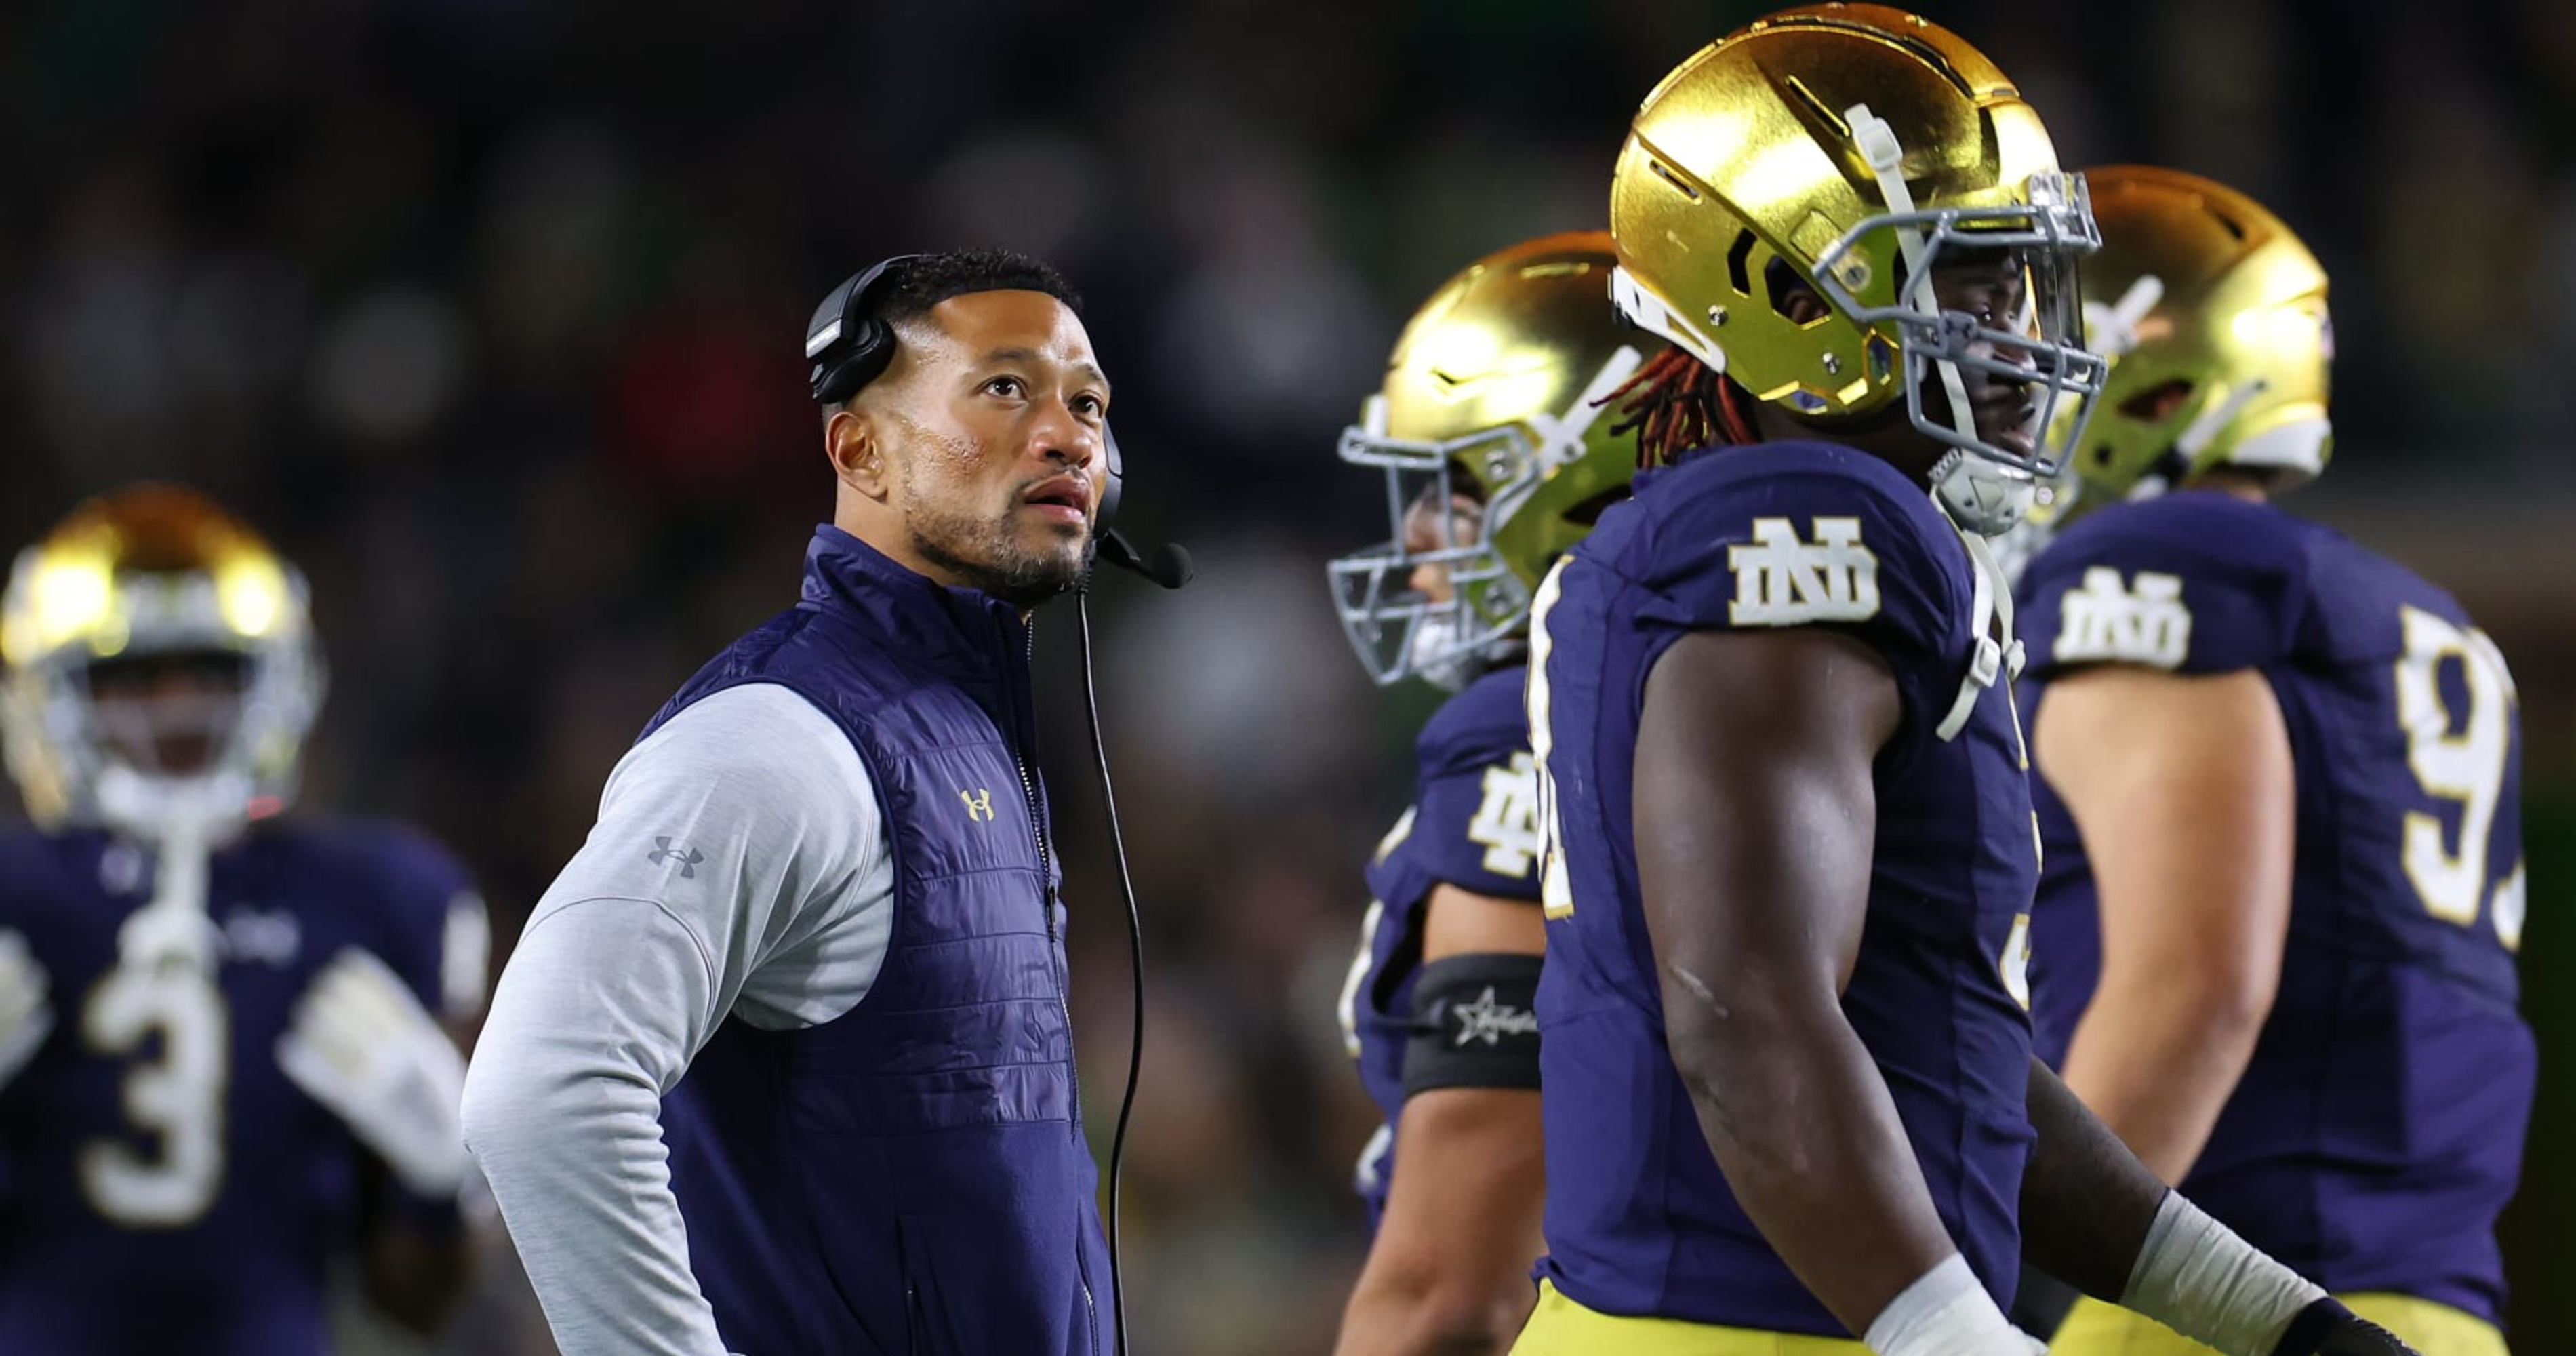 Marcus Freeman's Future with Notre Dame Questioned by CFB Twitter After